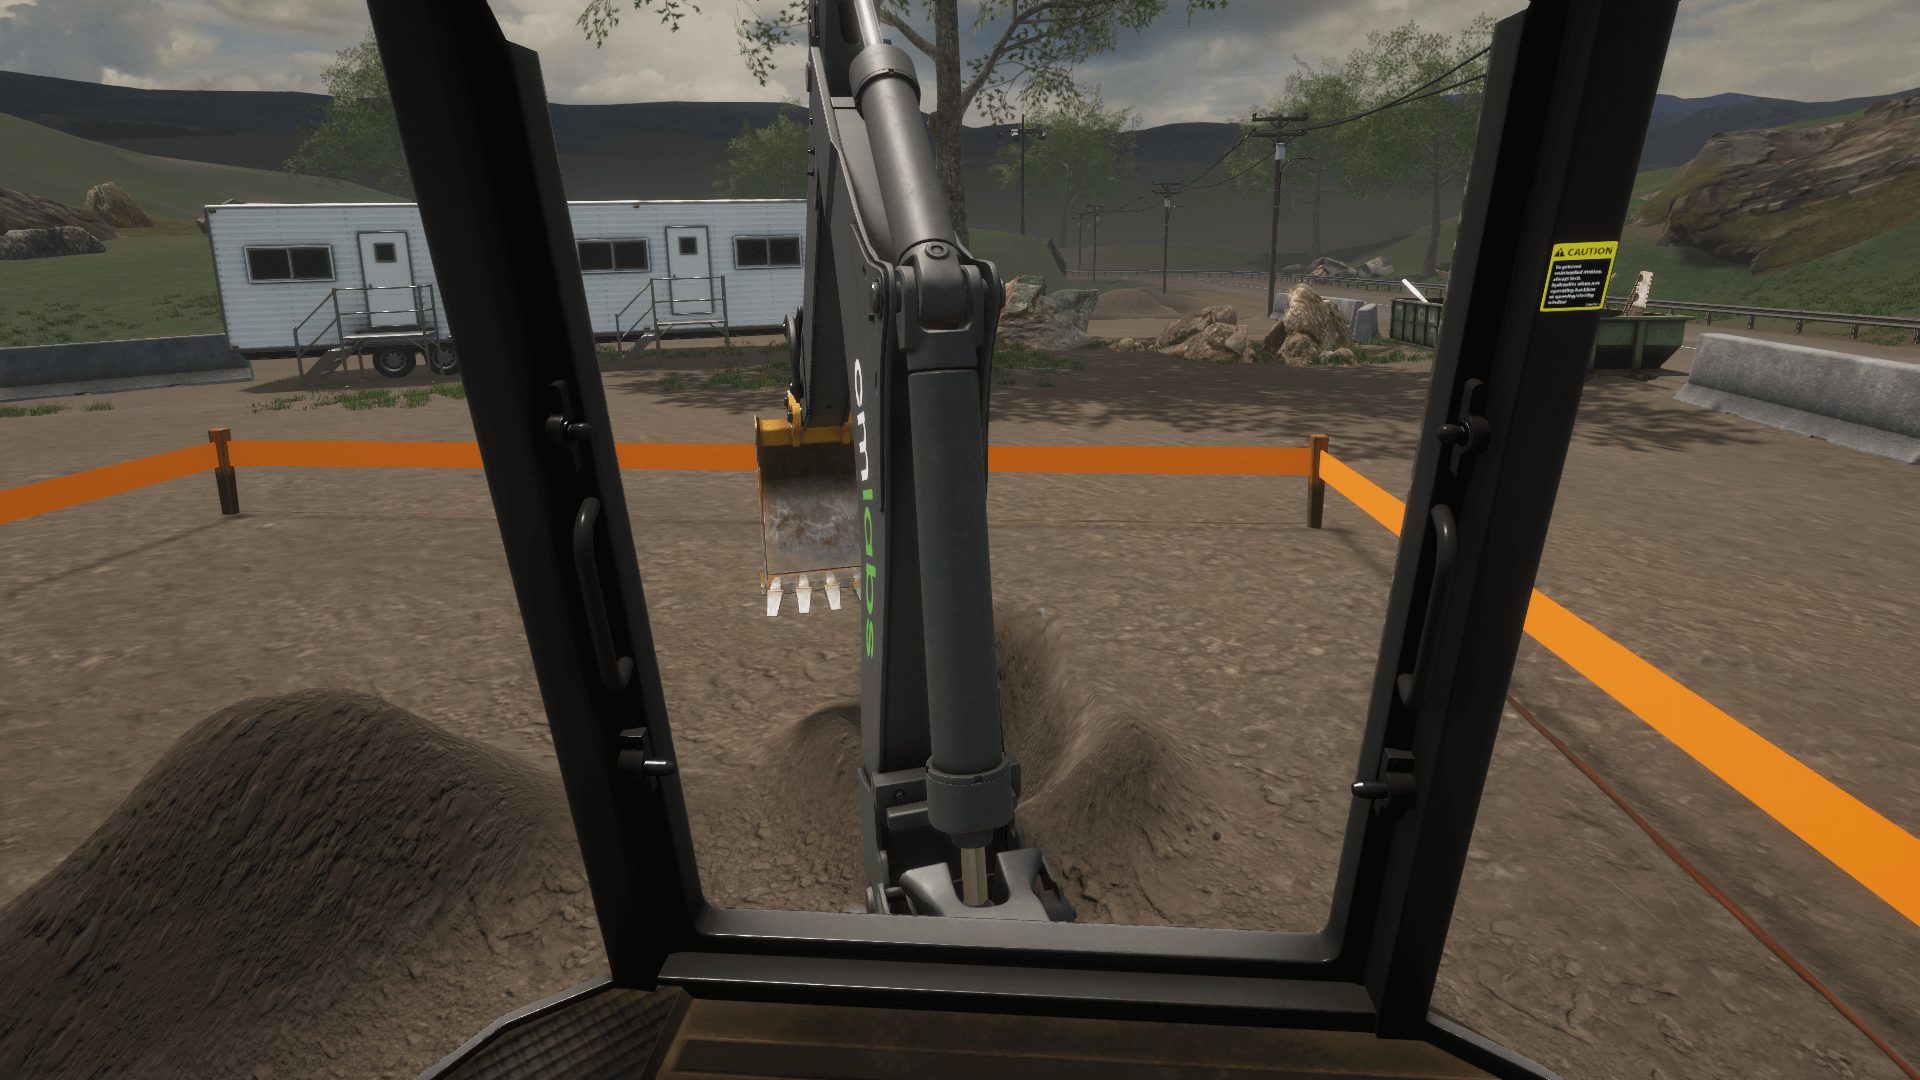 Backhoe simulator training – Cabin point of view